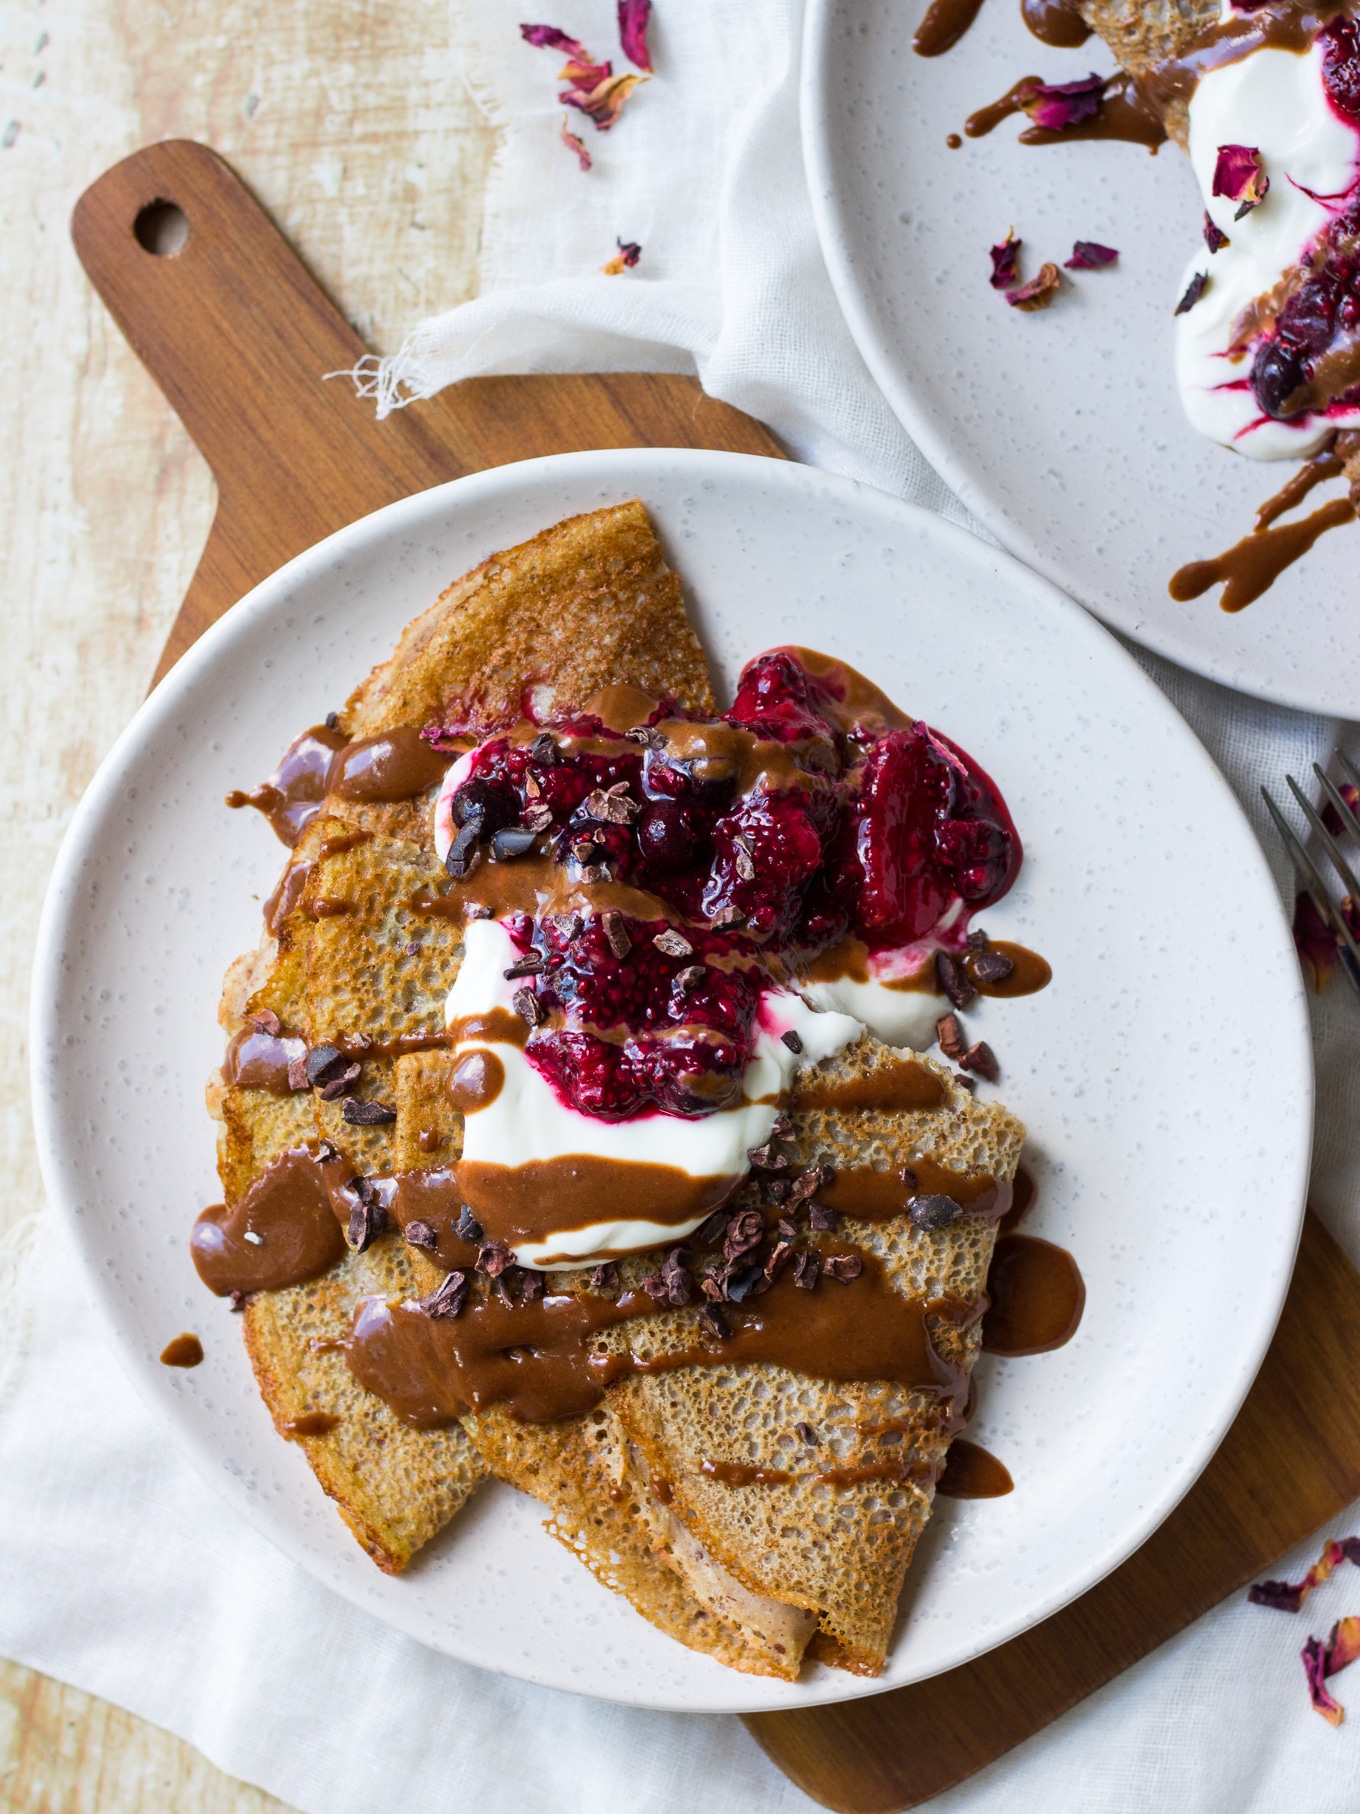 Sweet vegan buckwheat crepes folded in quarters, topped with yoghurt, berry sauce and chocolate sauce drizzle.